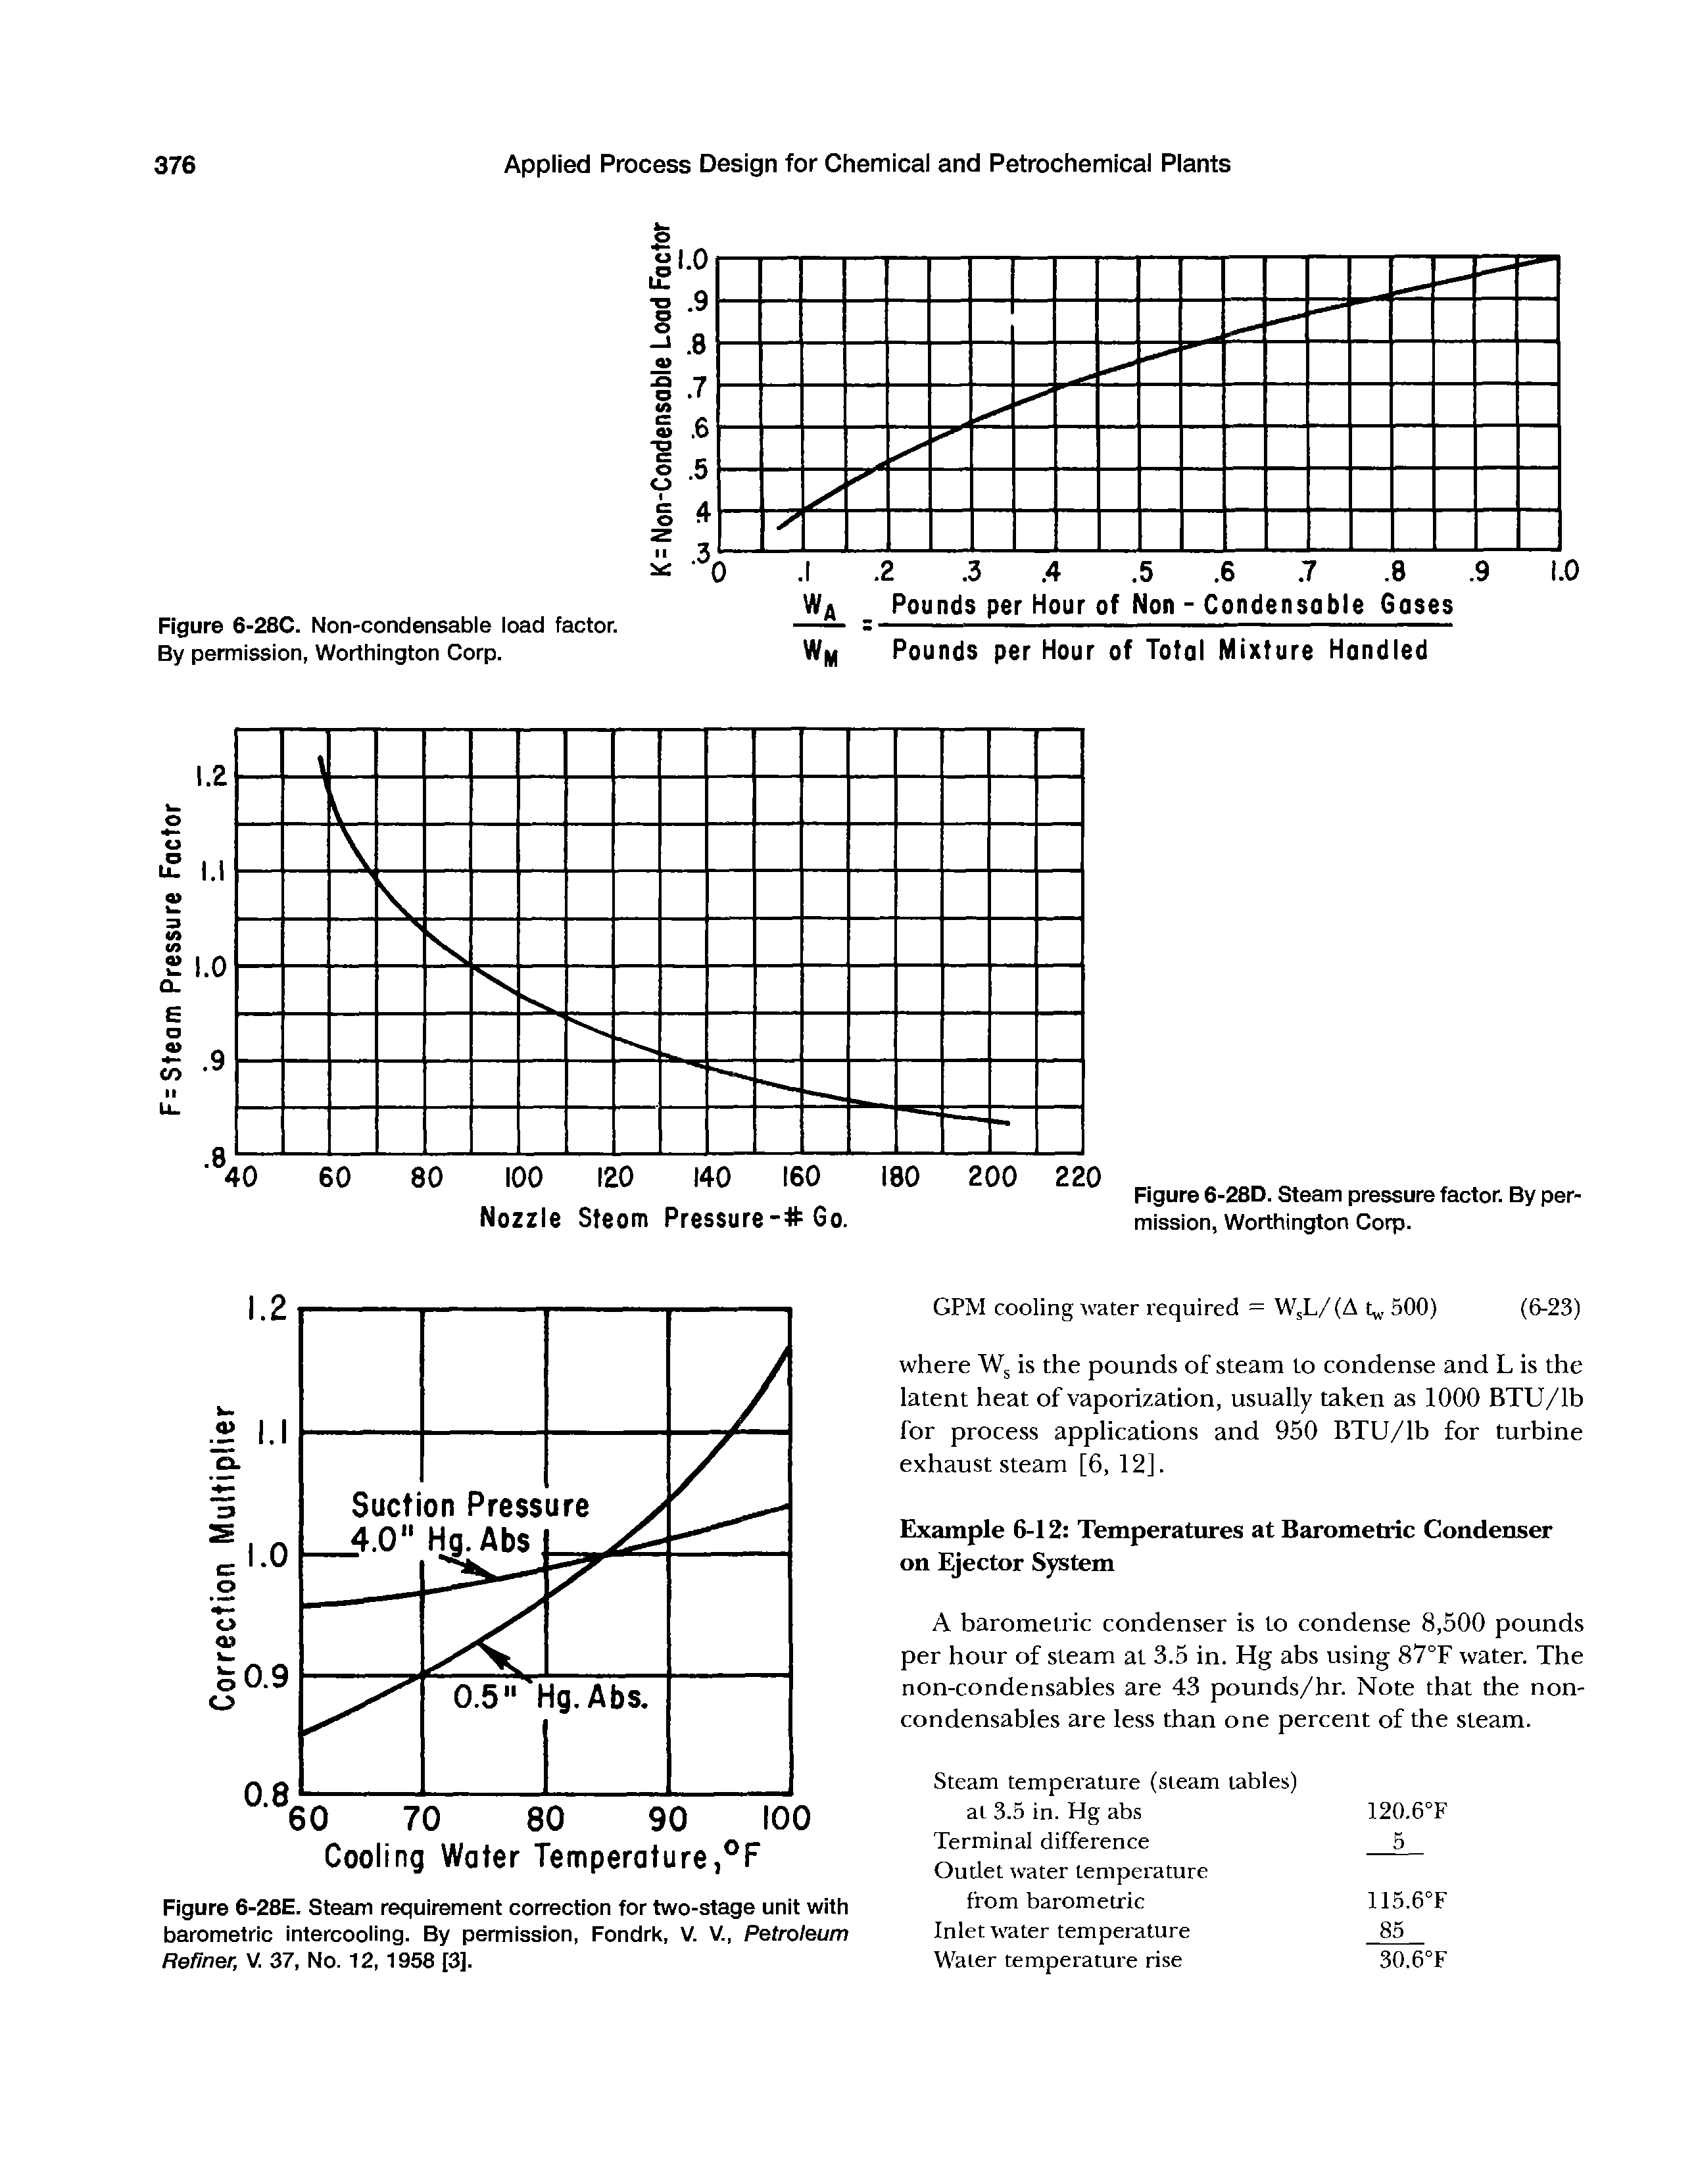 Figure 6-28E. Steam requirement correction for two-stage unit with barometric intercooling. By permission, Fondrk, V. V., Petroleum Refiner, V. 37, No. 12, 1958 [3].